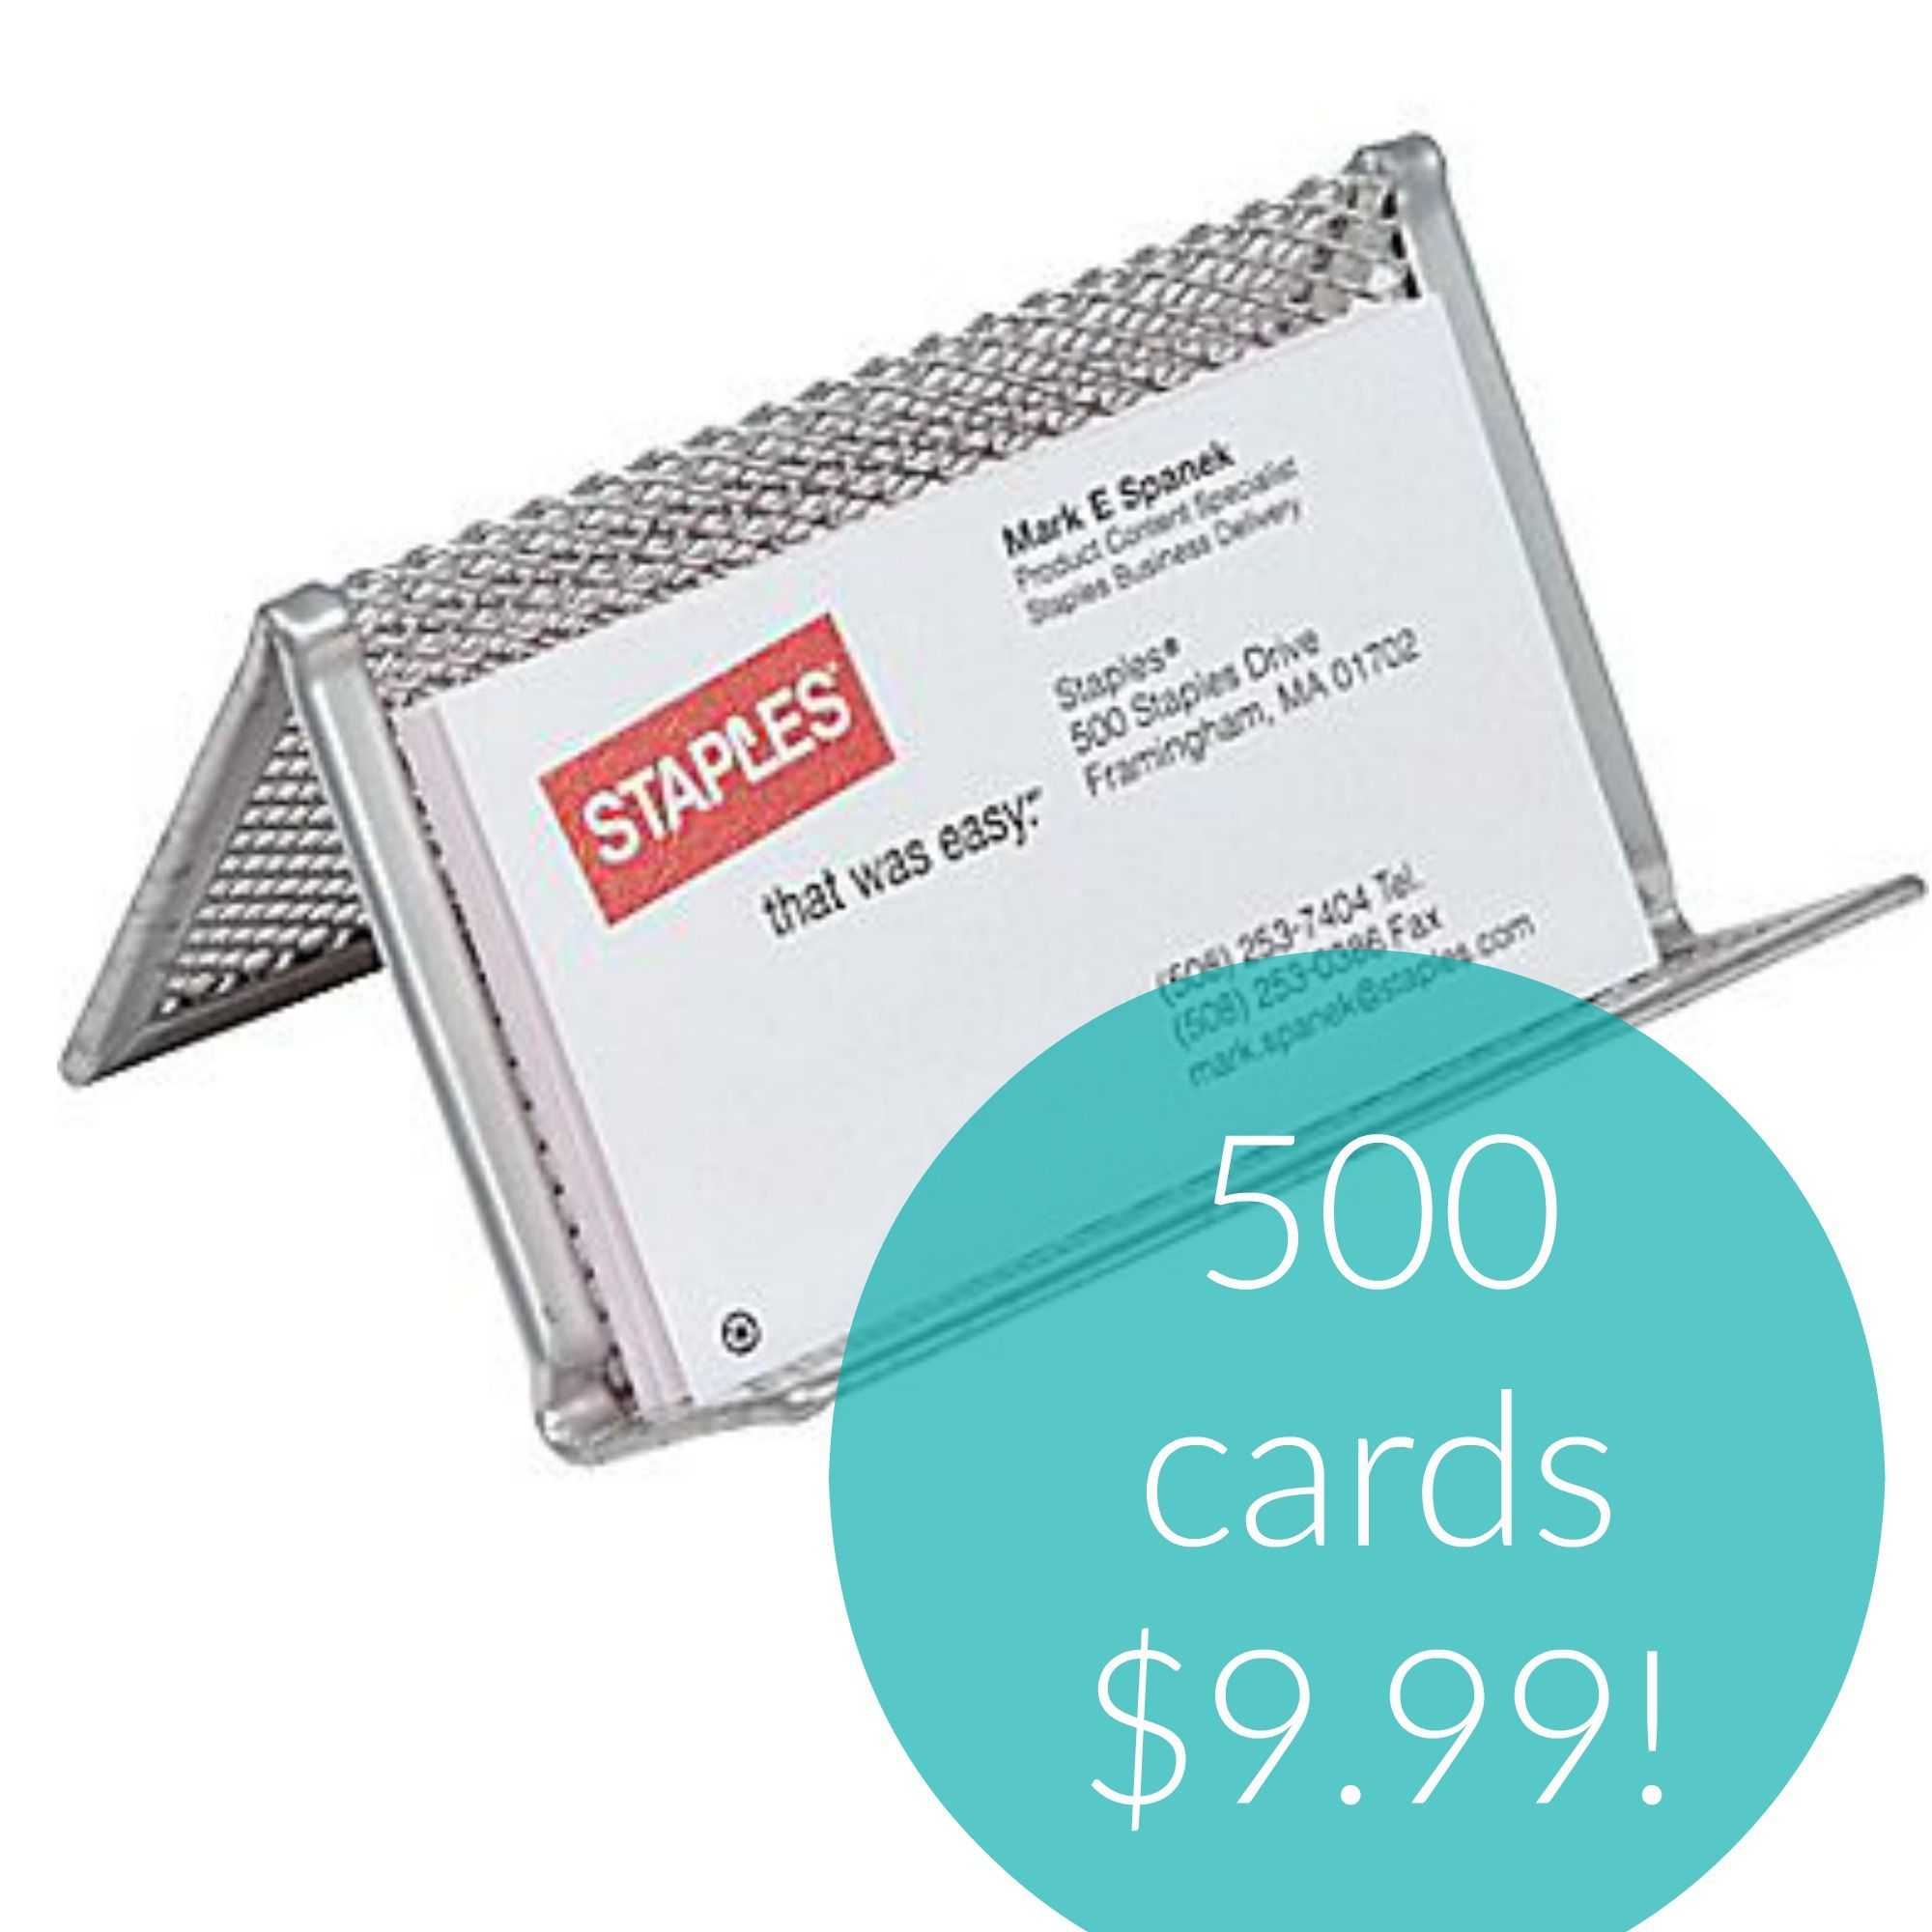 Standard Business Cards At Staples For Free | Business Cards Throughout Staples Business Card Template